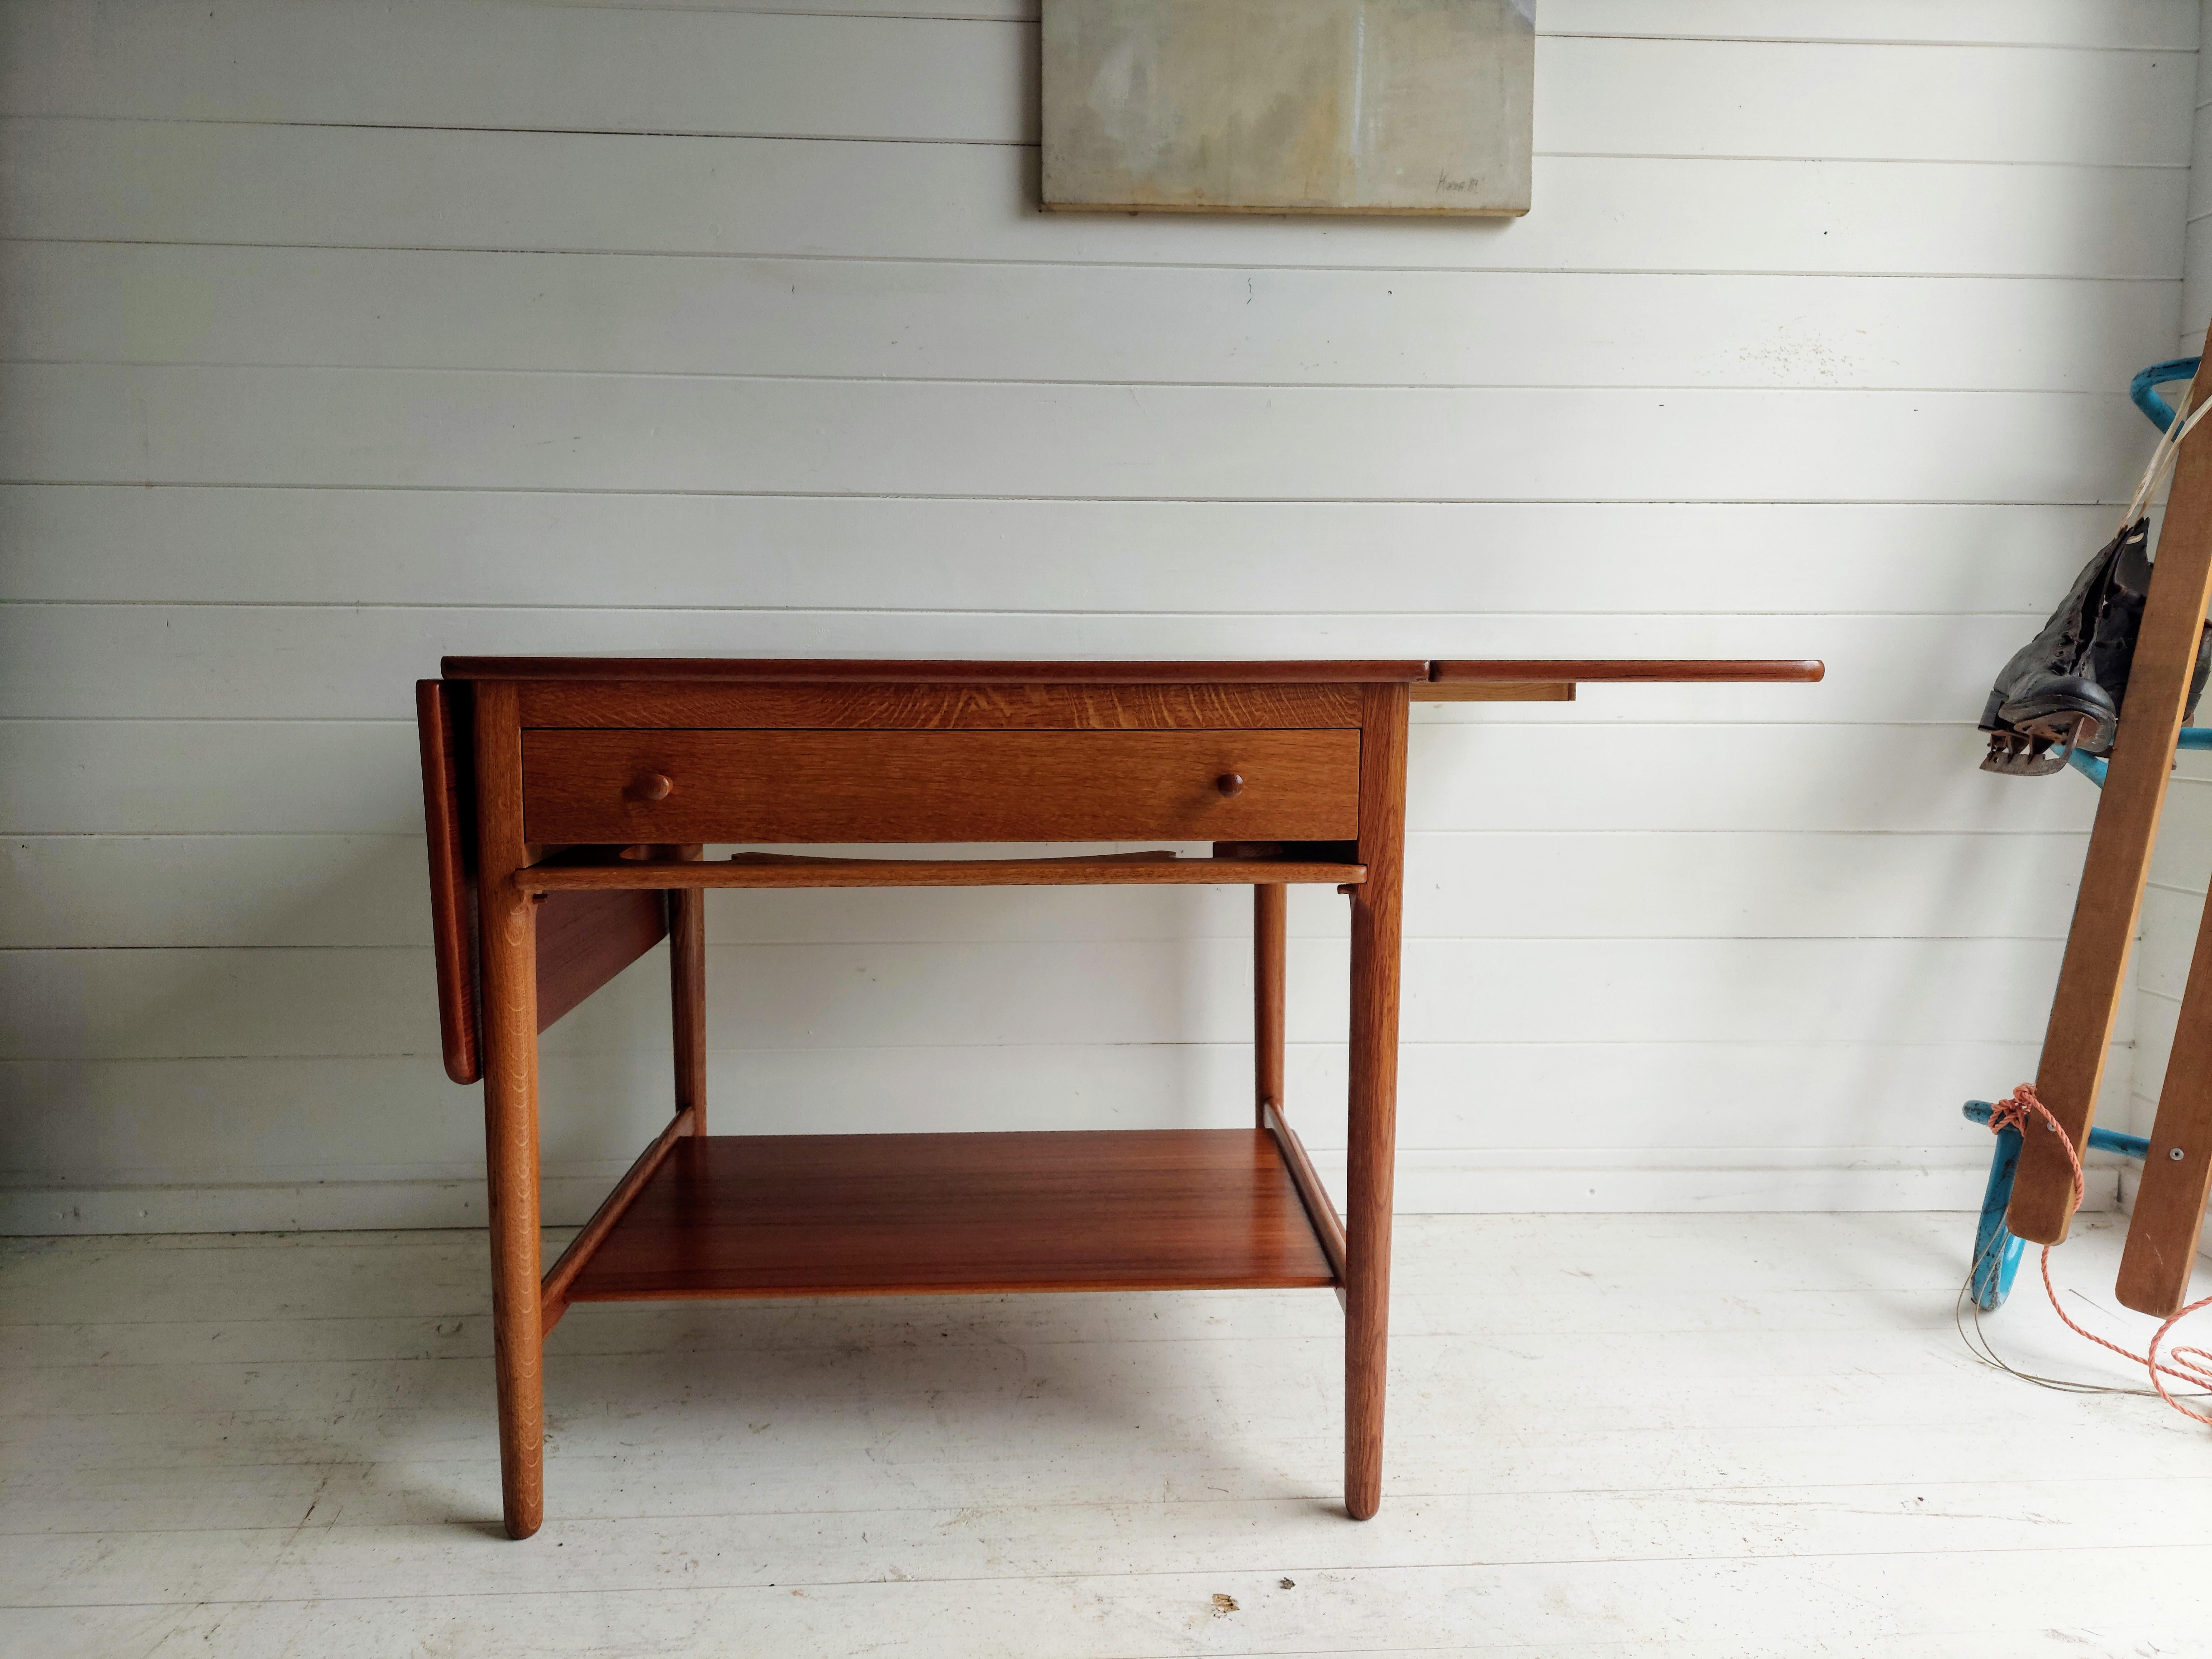 1950s Danish solid teak sewing or side table (model AT33) designed by Hans J Wegner and manufactured Andreas Tuck.

Crafted with two drop leaves that extend the table from 66cm to 118 cm maximum length.
The drawer, boasting sculptural teak pulls,